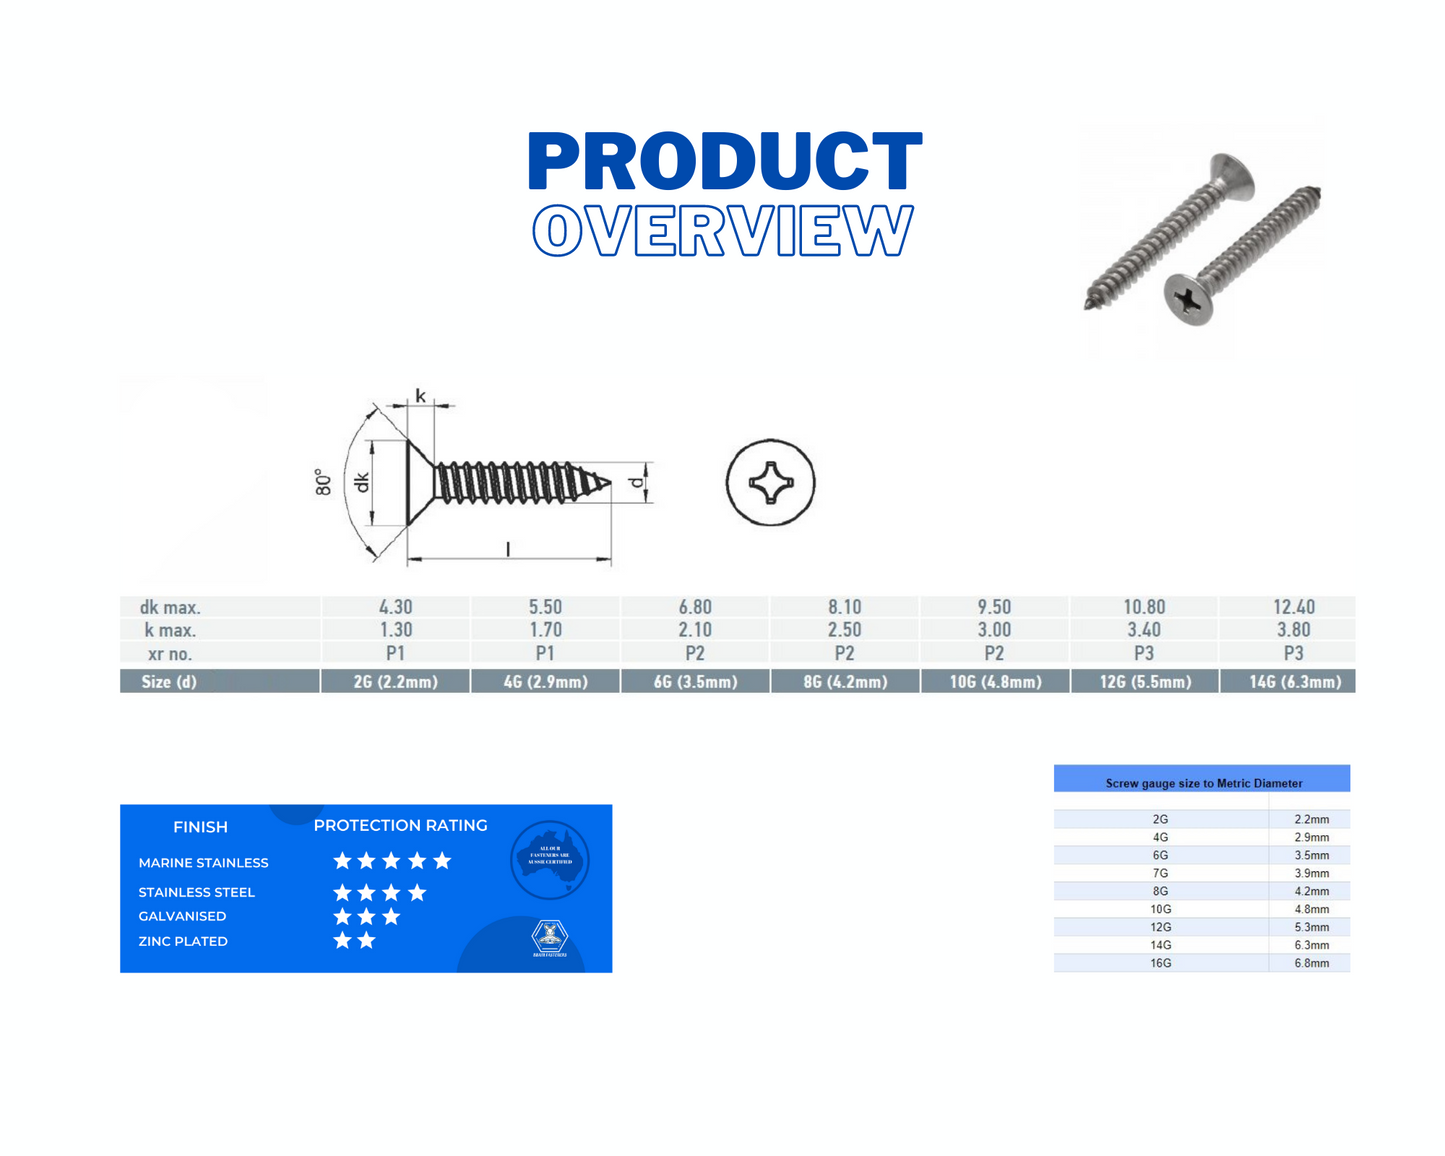 6G x 45mm Countersunk Phillips Self Tapping Screws Stainless Steel